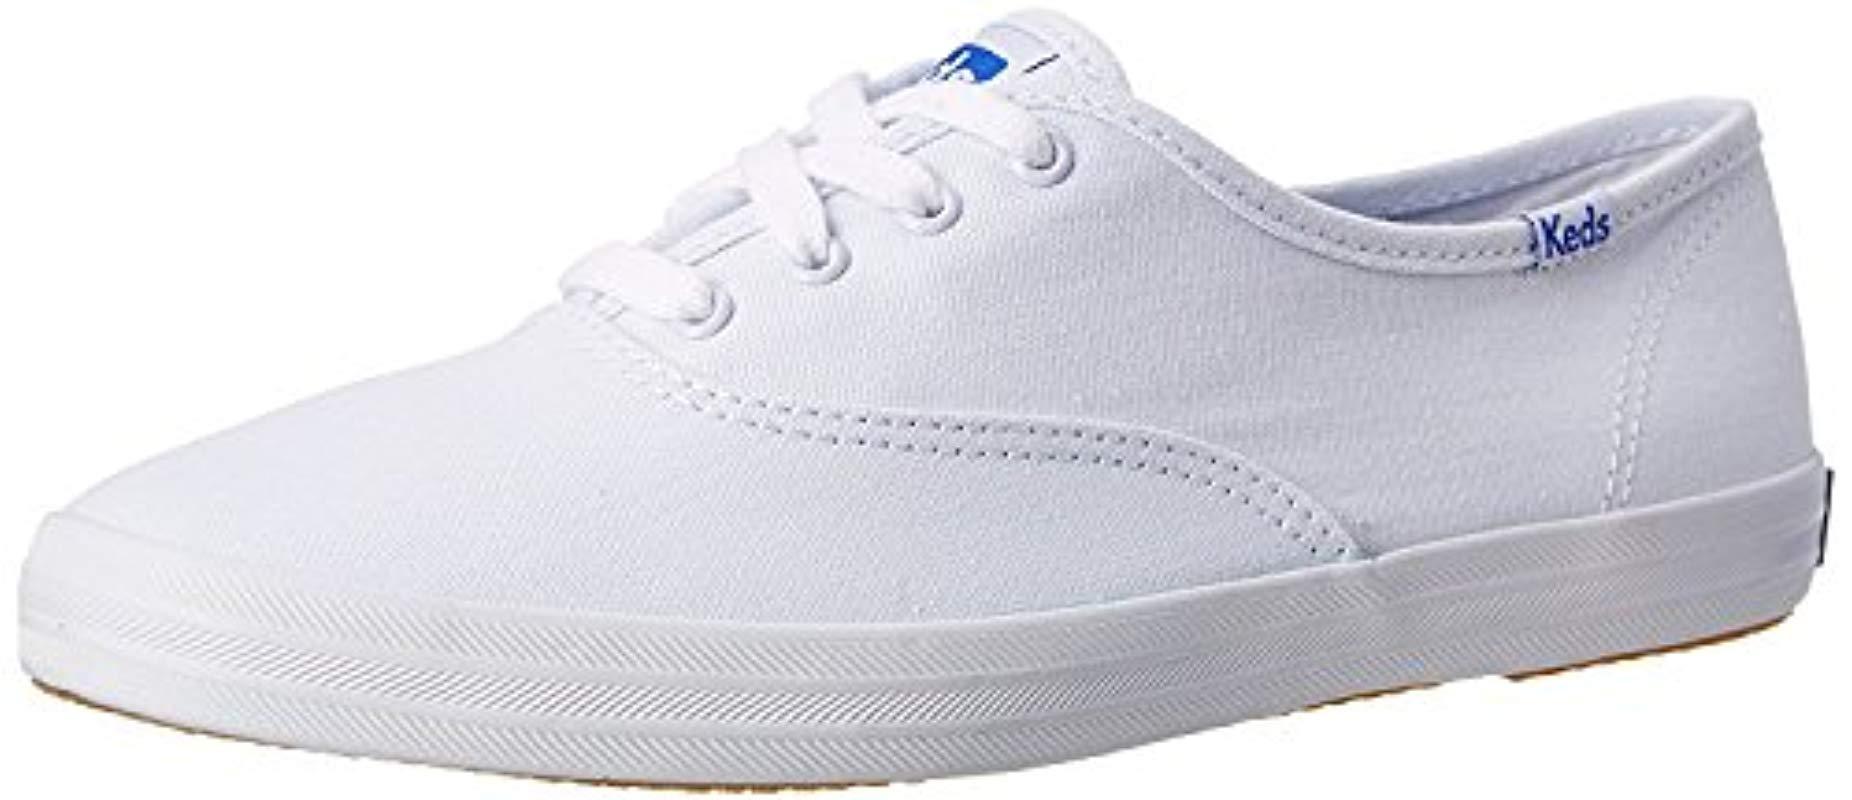 Keds Champion Original Leather Lace-up Sneaker, White Leather, 7.5 S Us ...